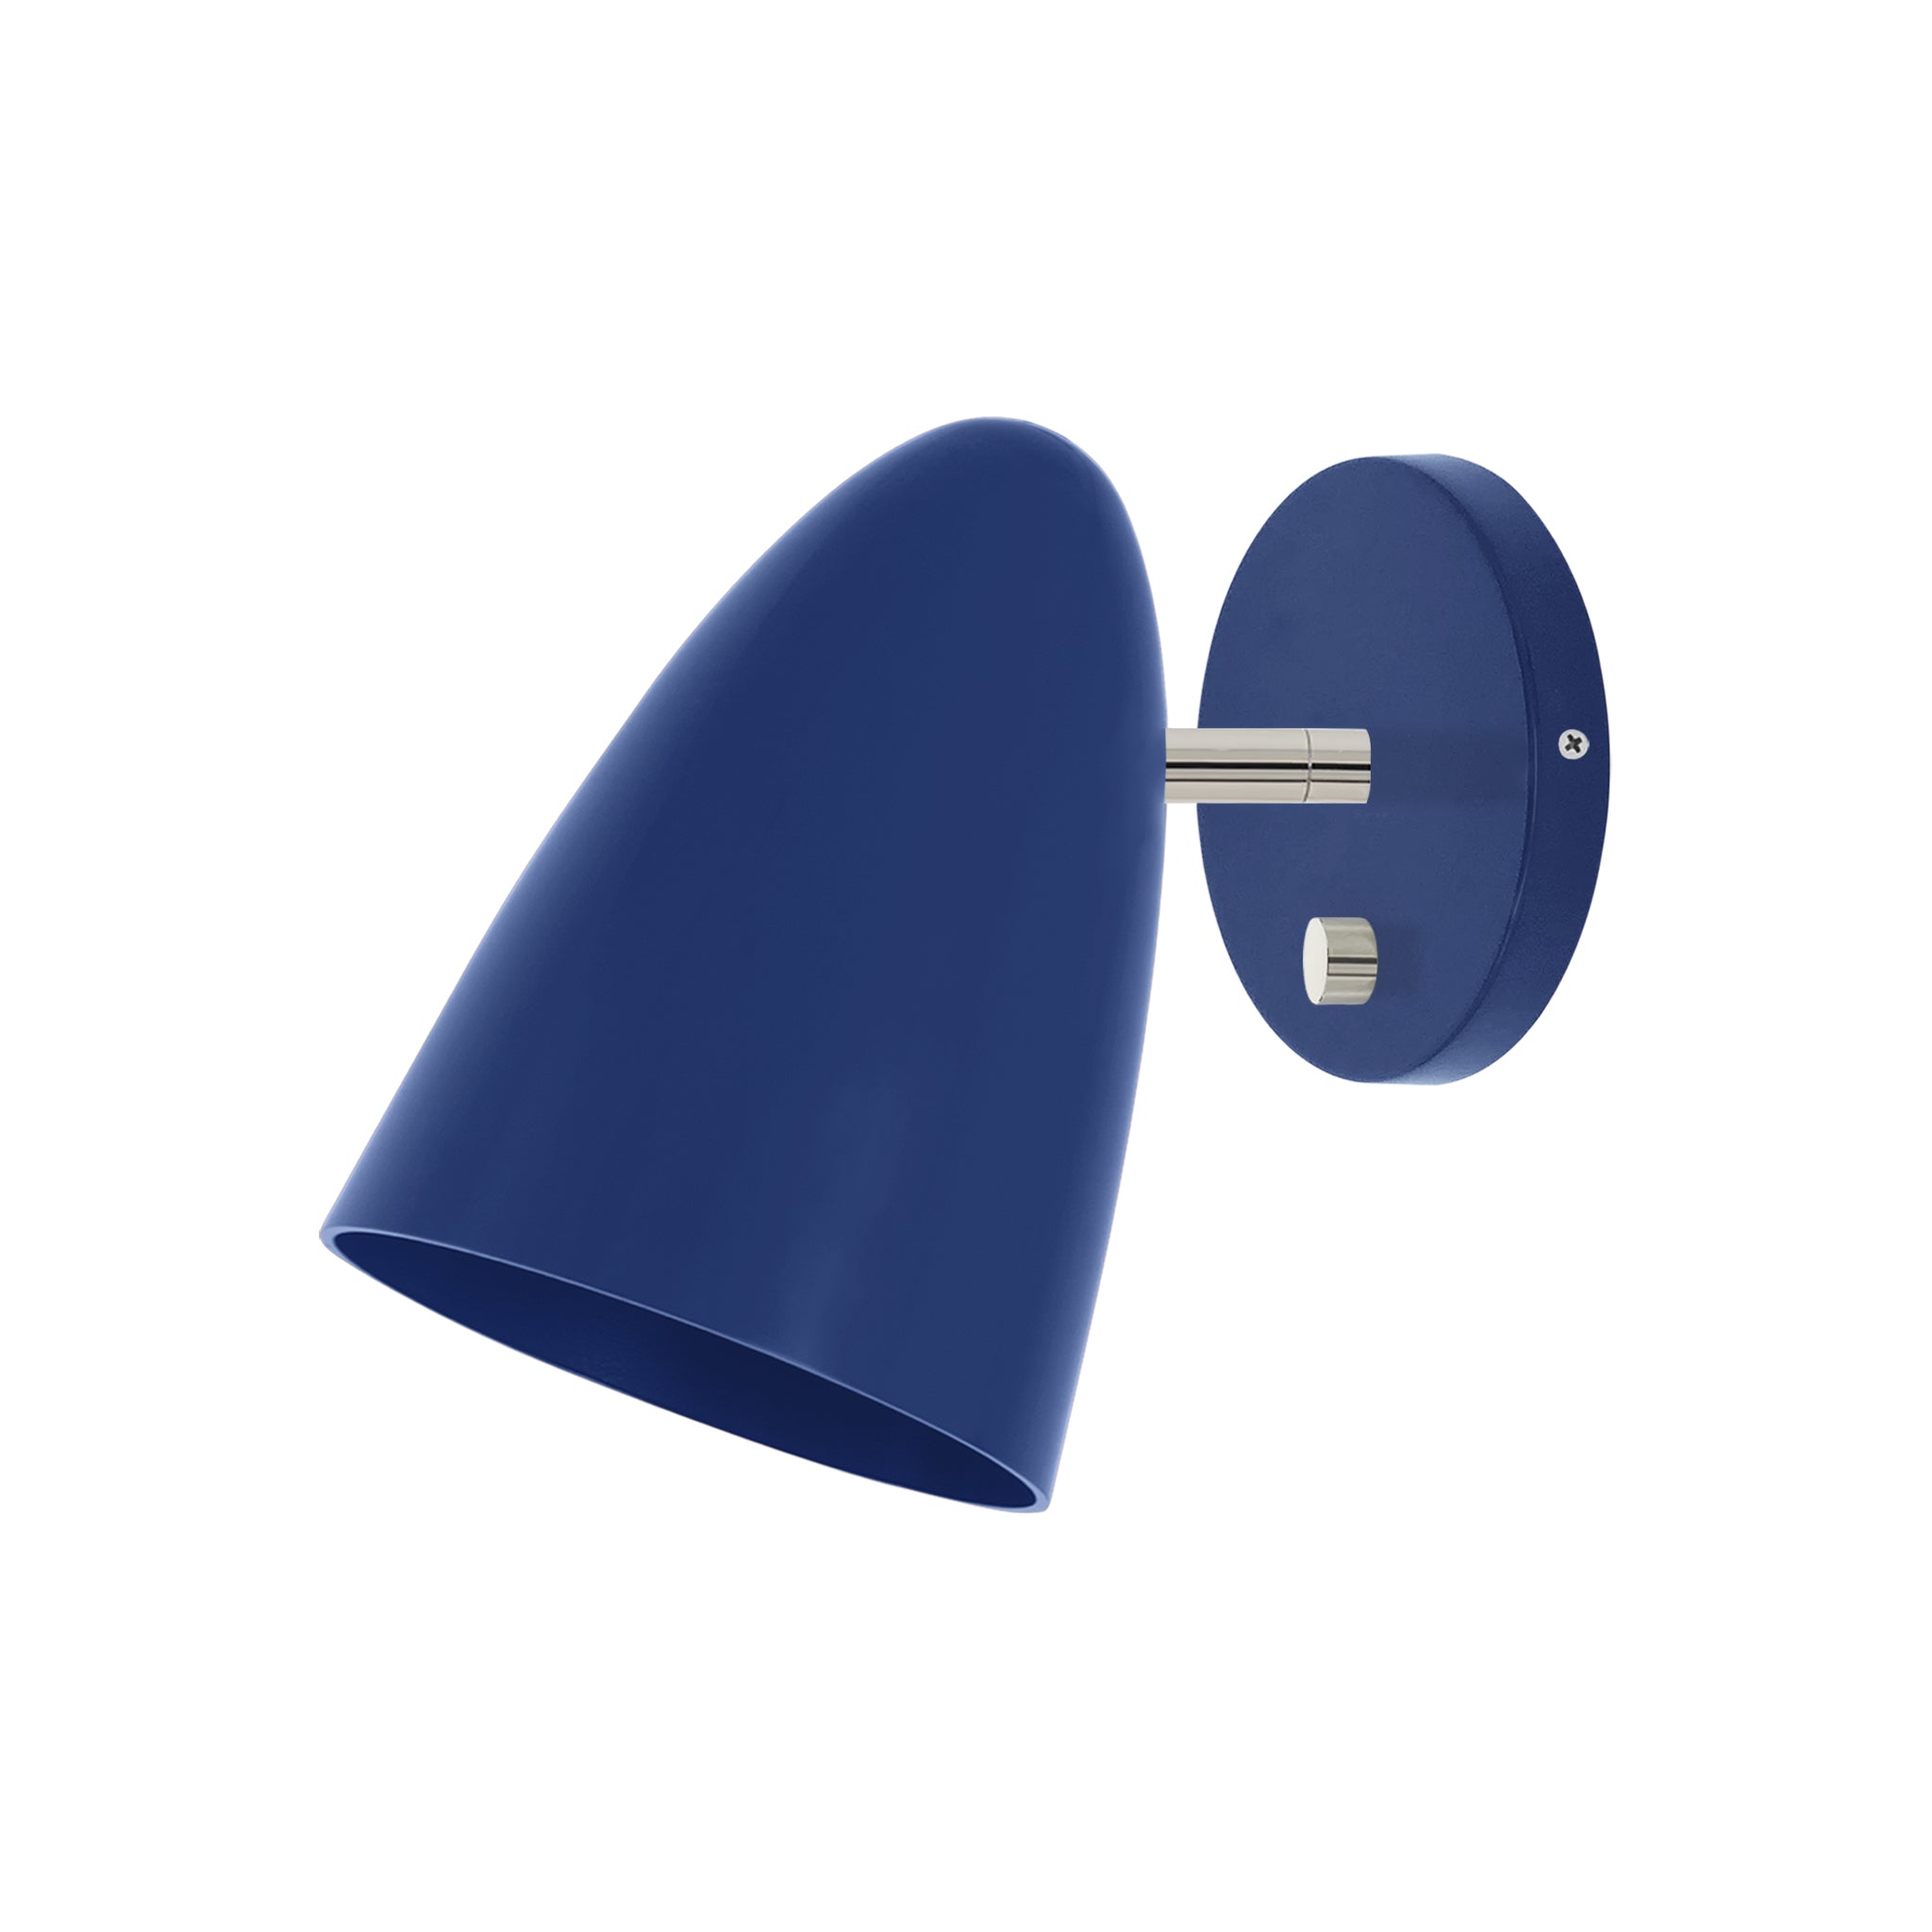 Nickel and cobalt color Boom sconce no arm Dutton Brown lighting